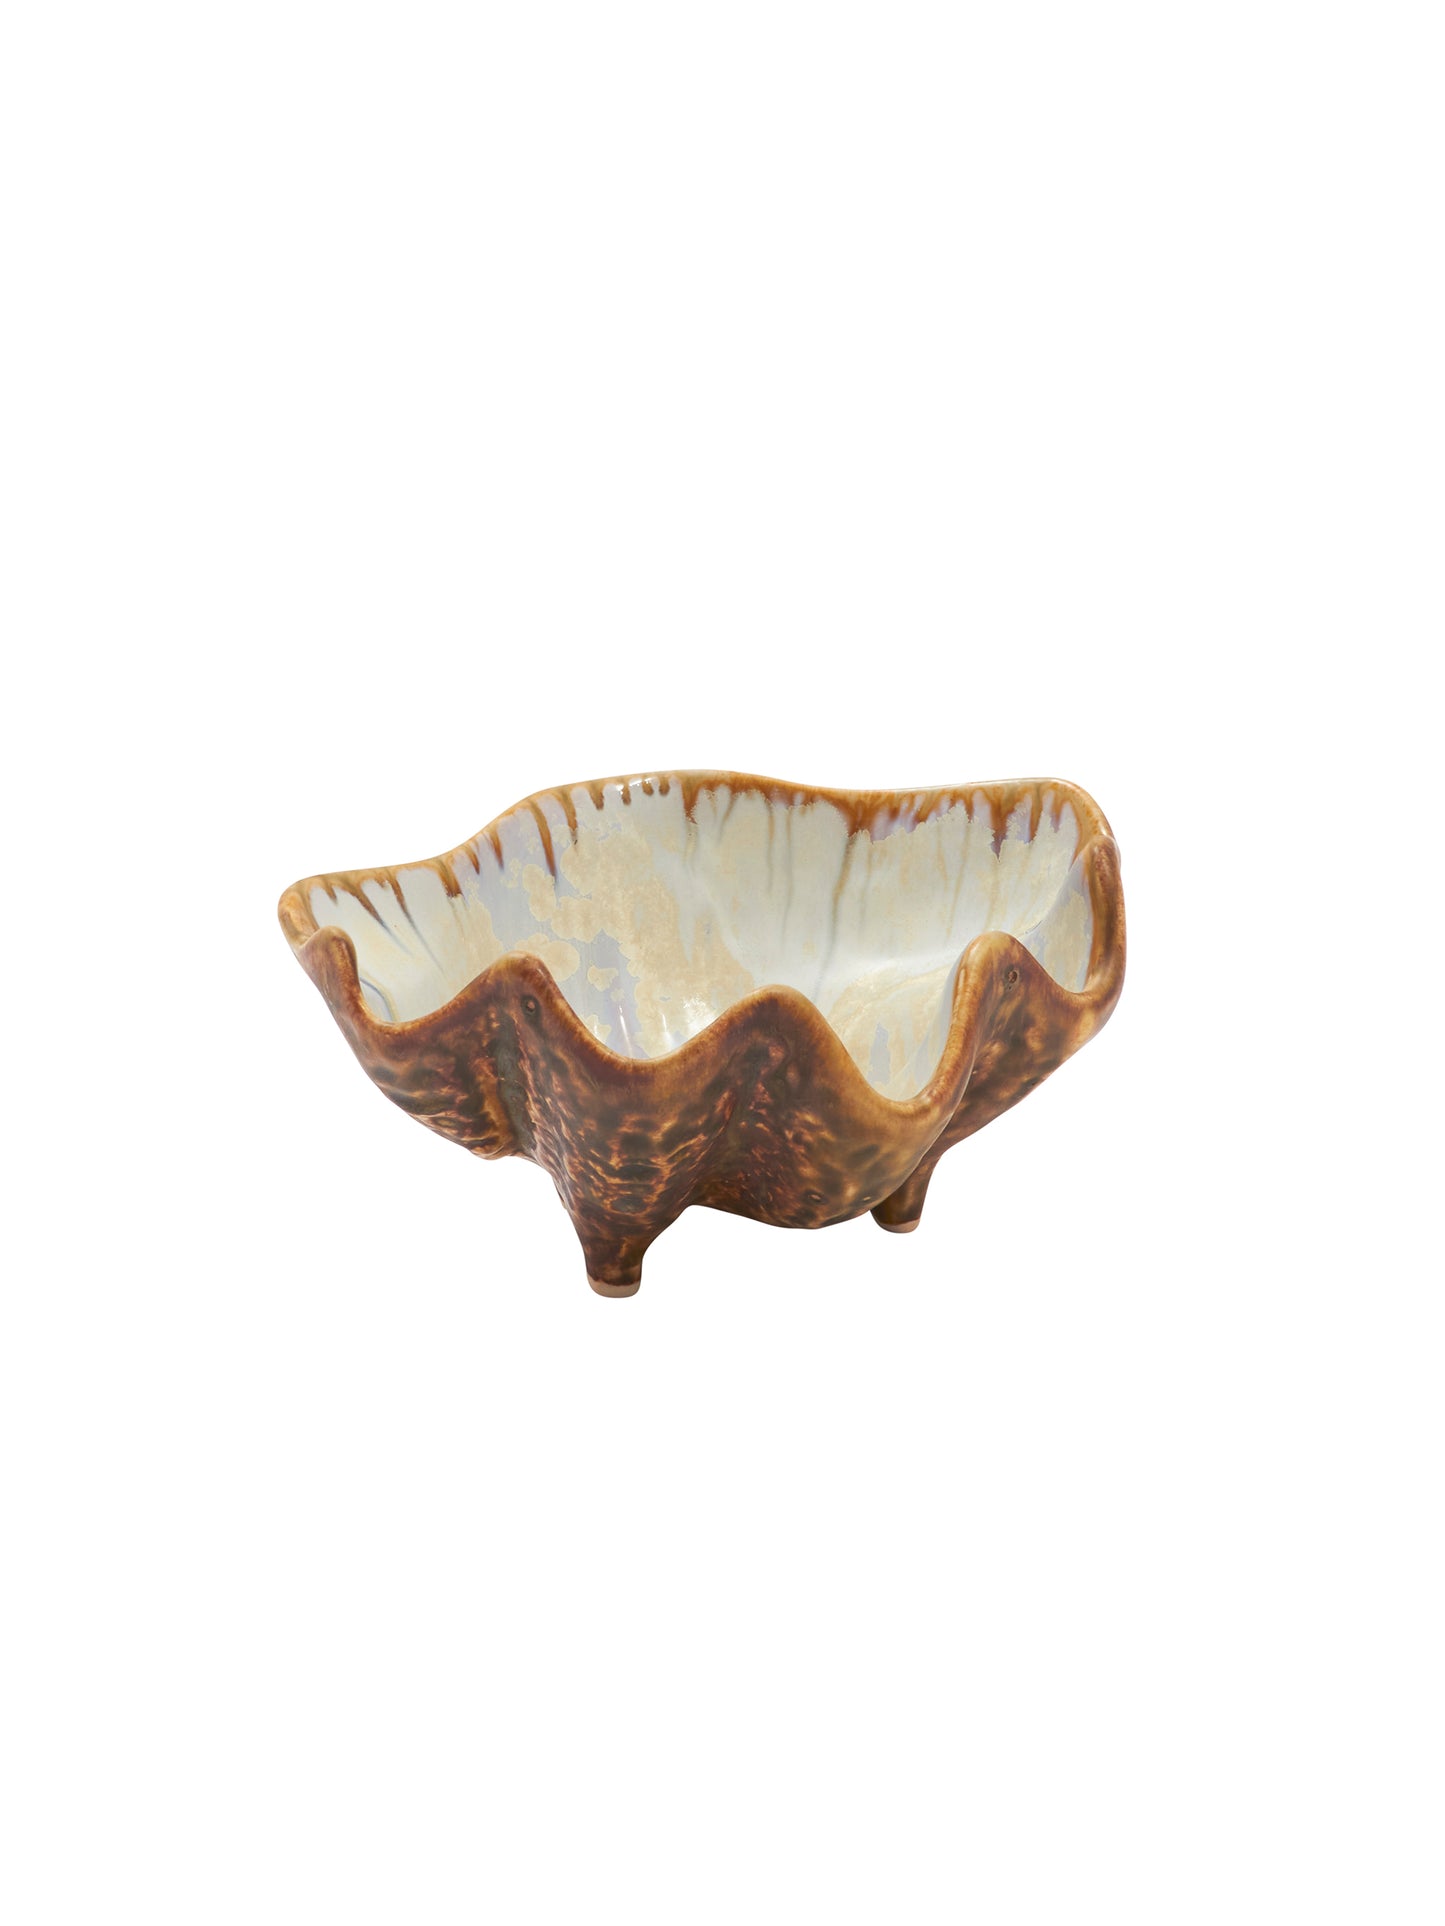 Abalone and Tortoise Sea Clam Bowl Small Weston Table